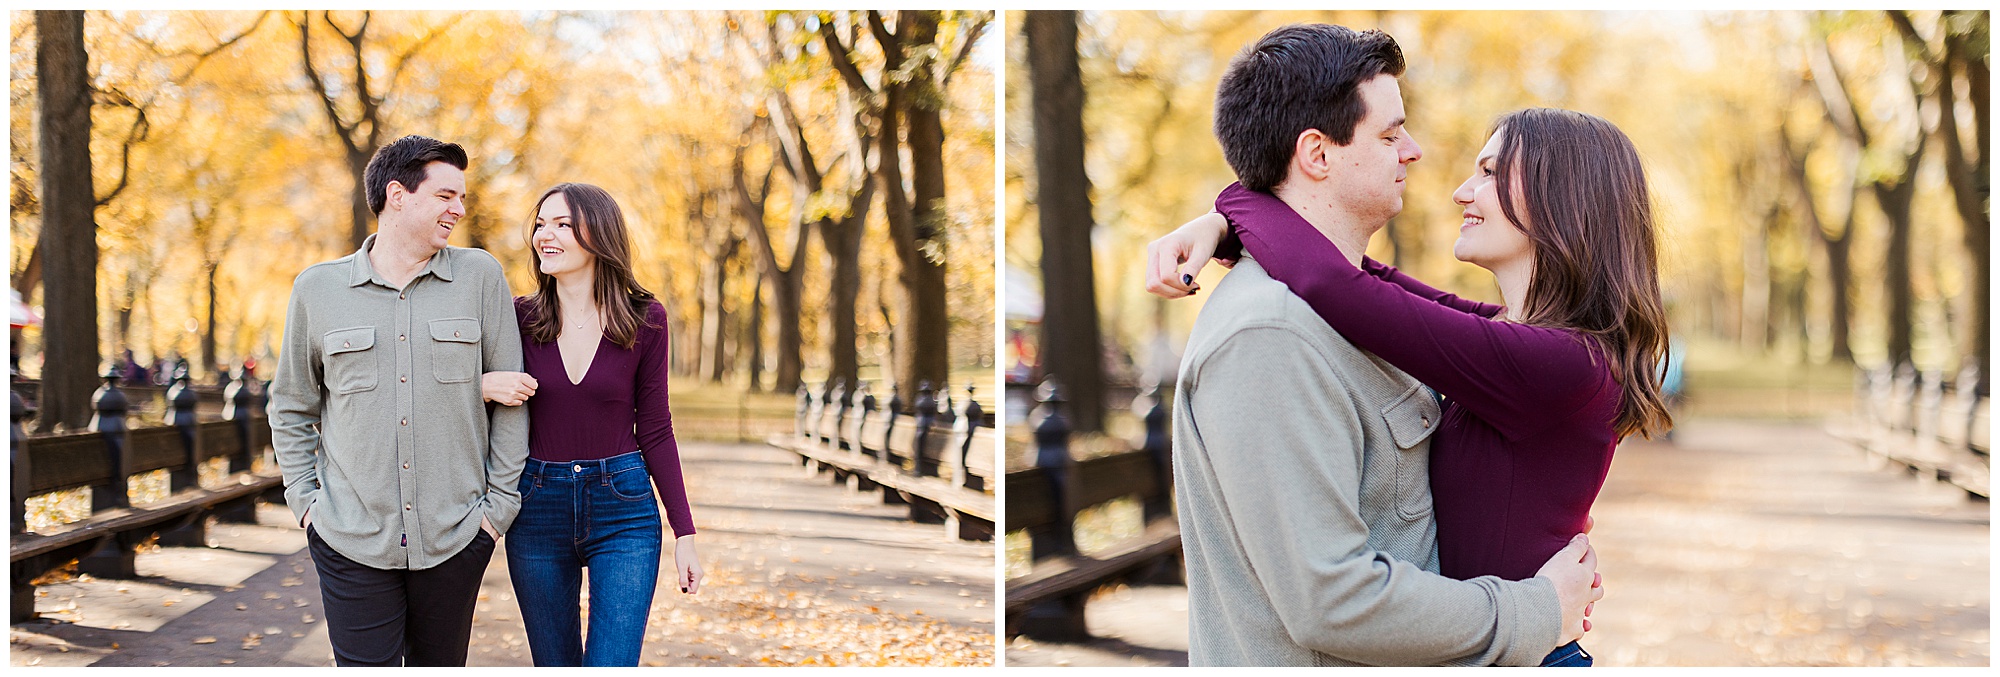 Jaw-Dropping Engagement Photoshoot in Central Park